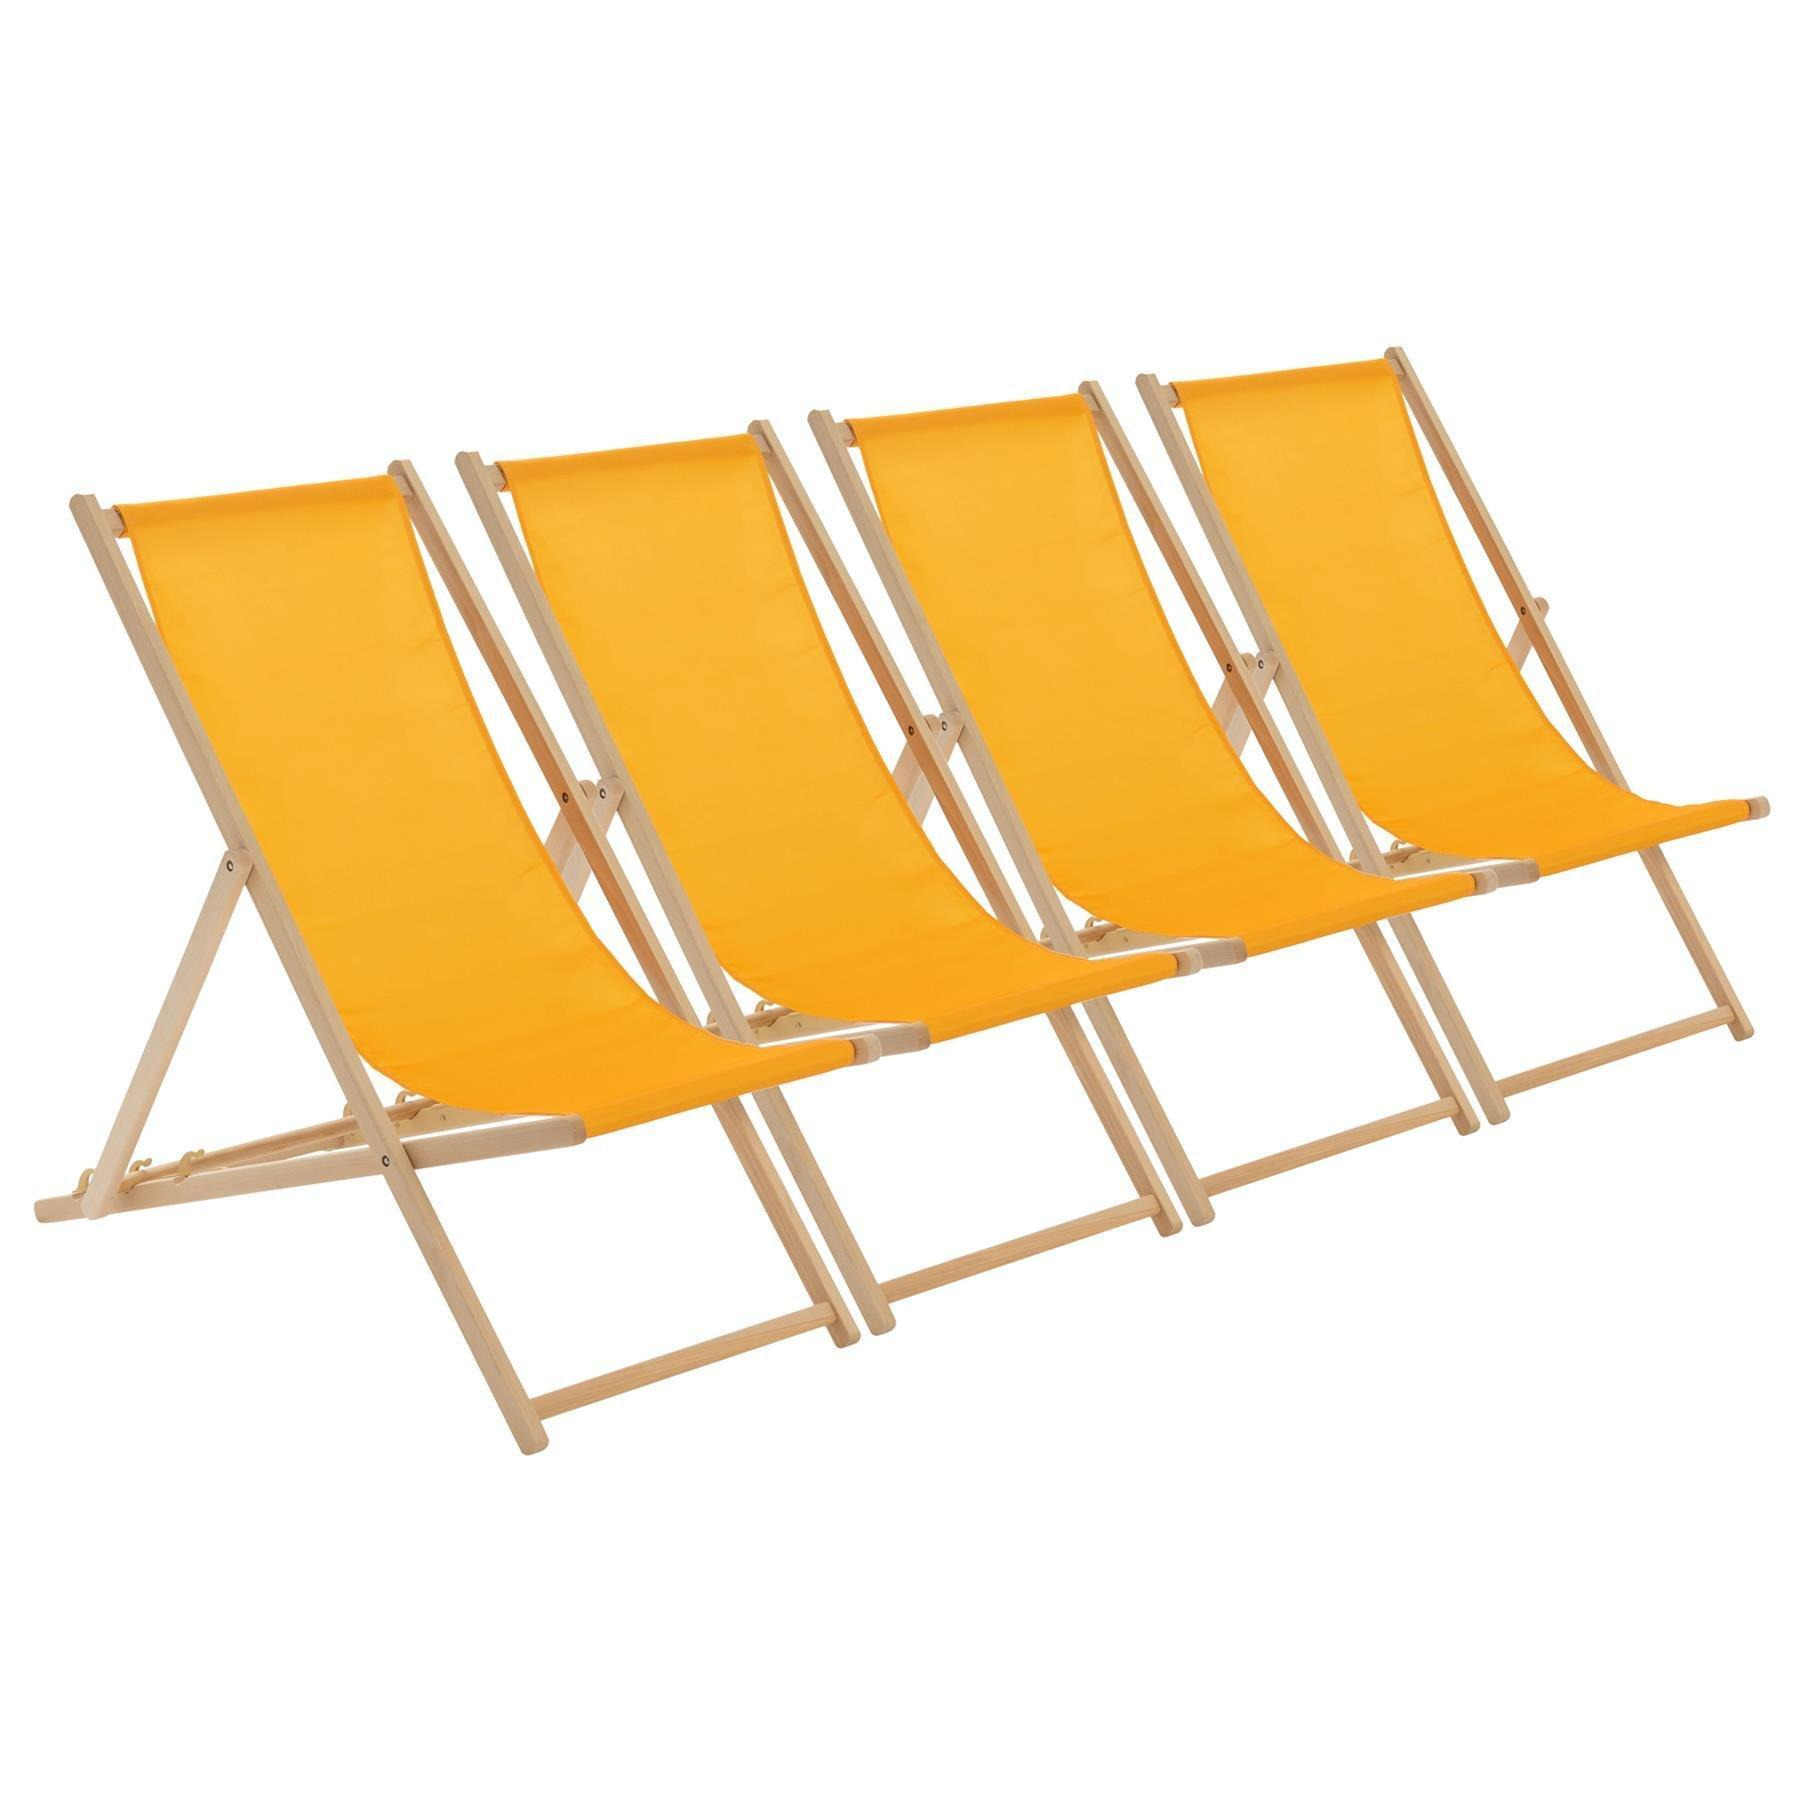 Folding Wooden Deck Chairs Mustard Pack of 4 - image 1